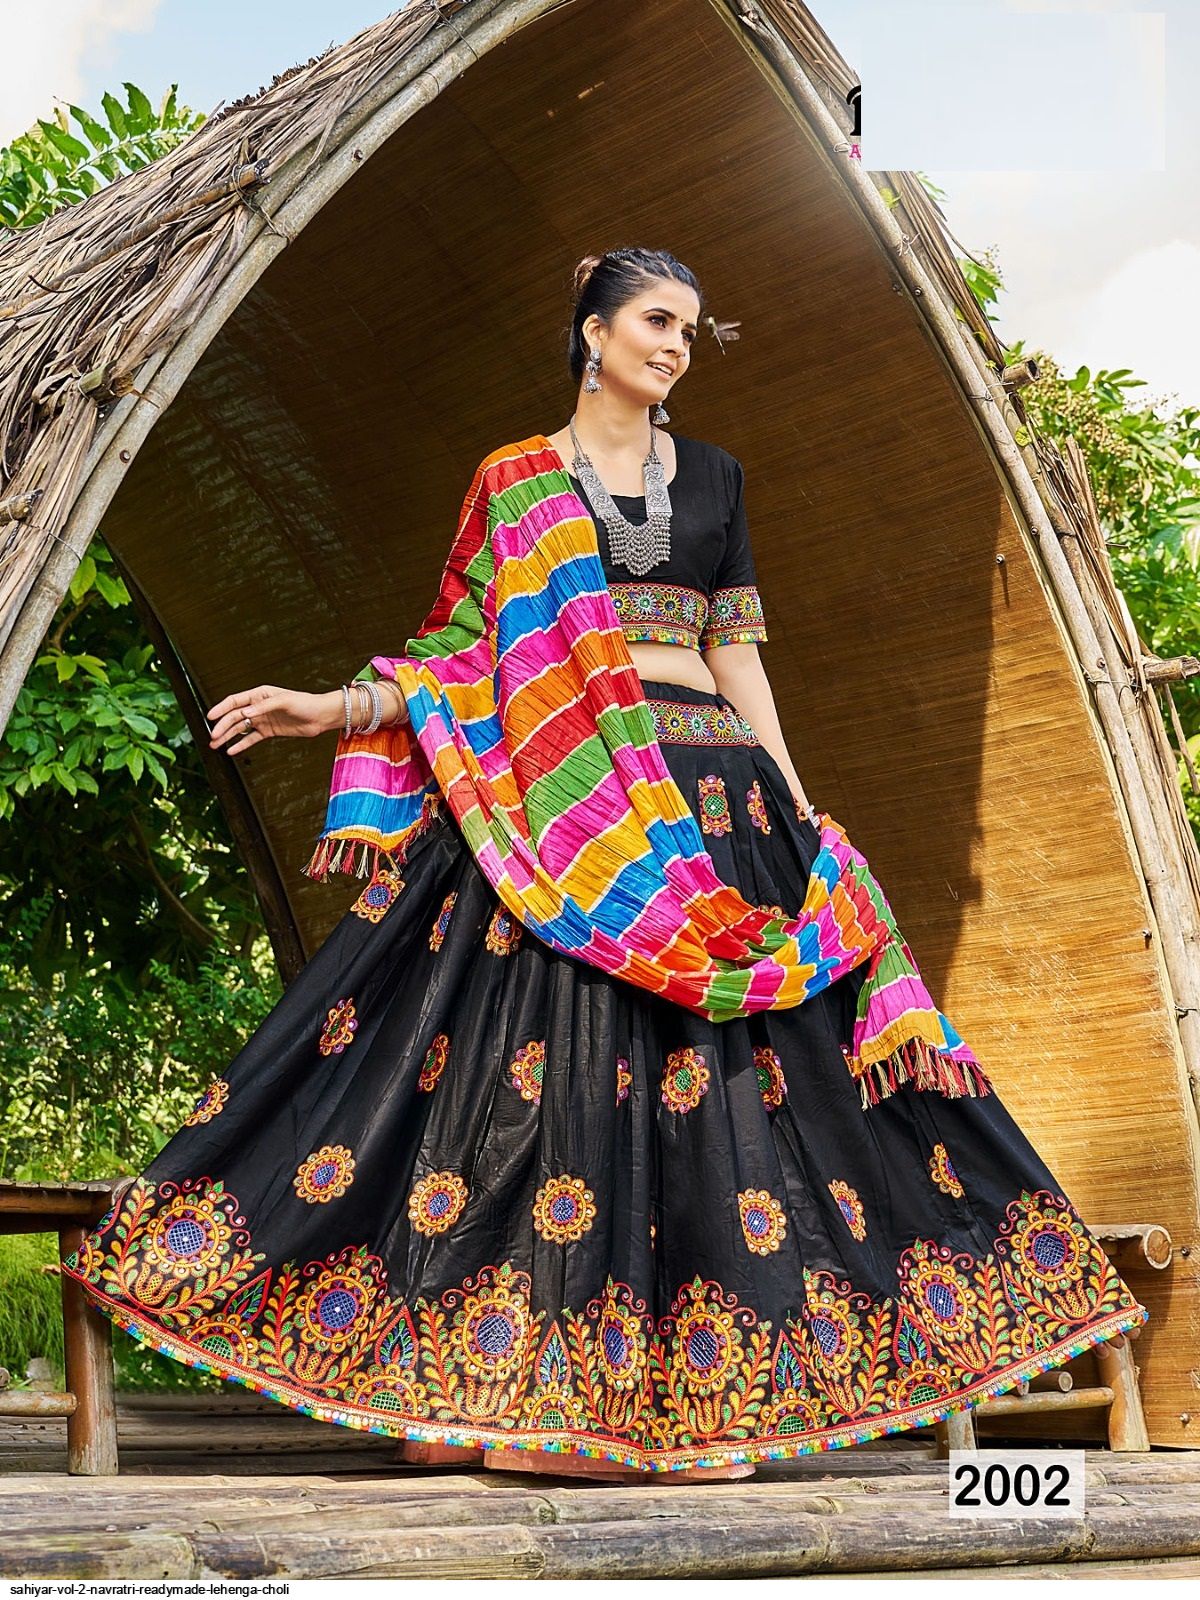 Customize Your Style with Ethnic Plus: Made to Measure Lehenga Collection